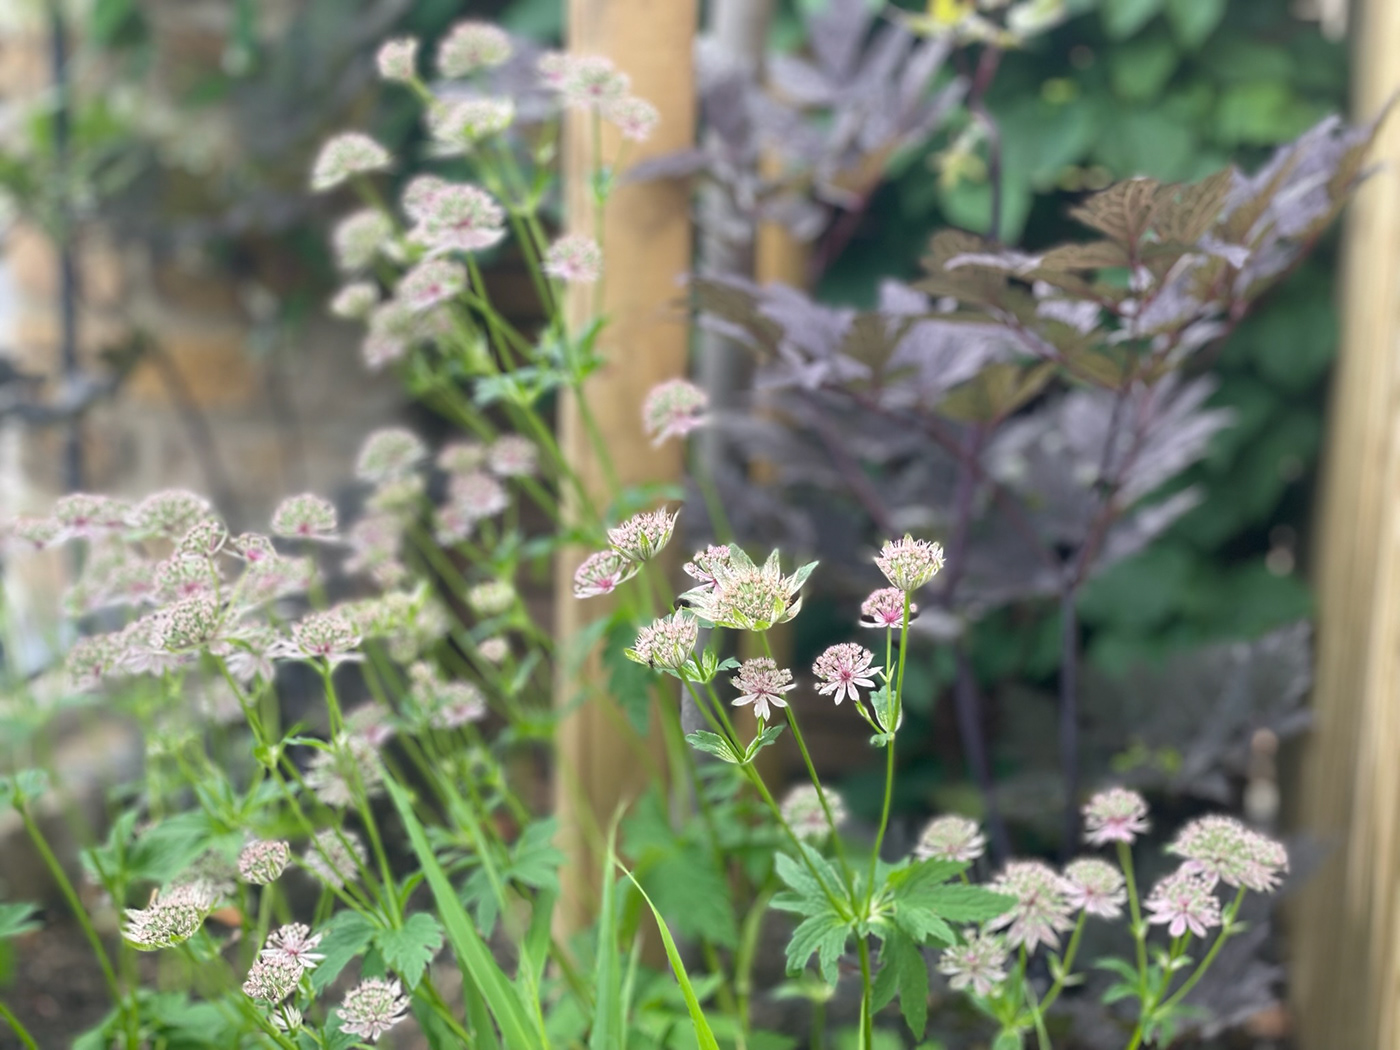 Astrantia and Actaea planting combination